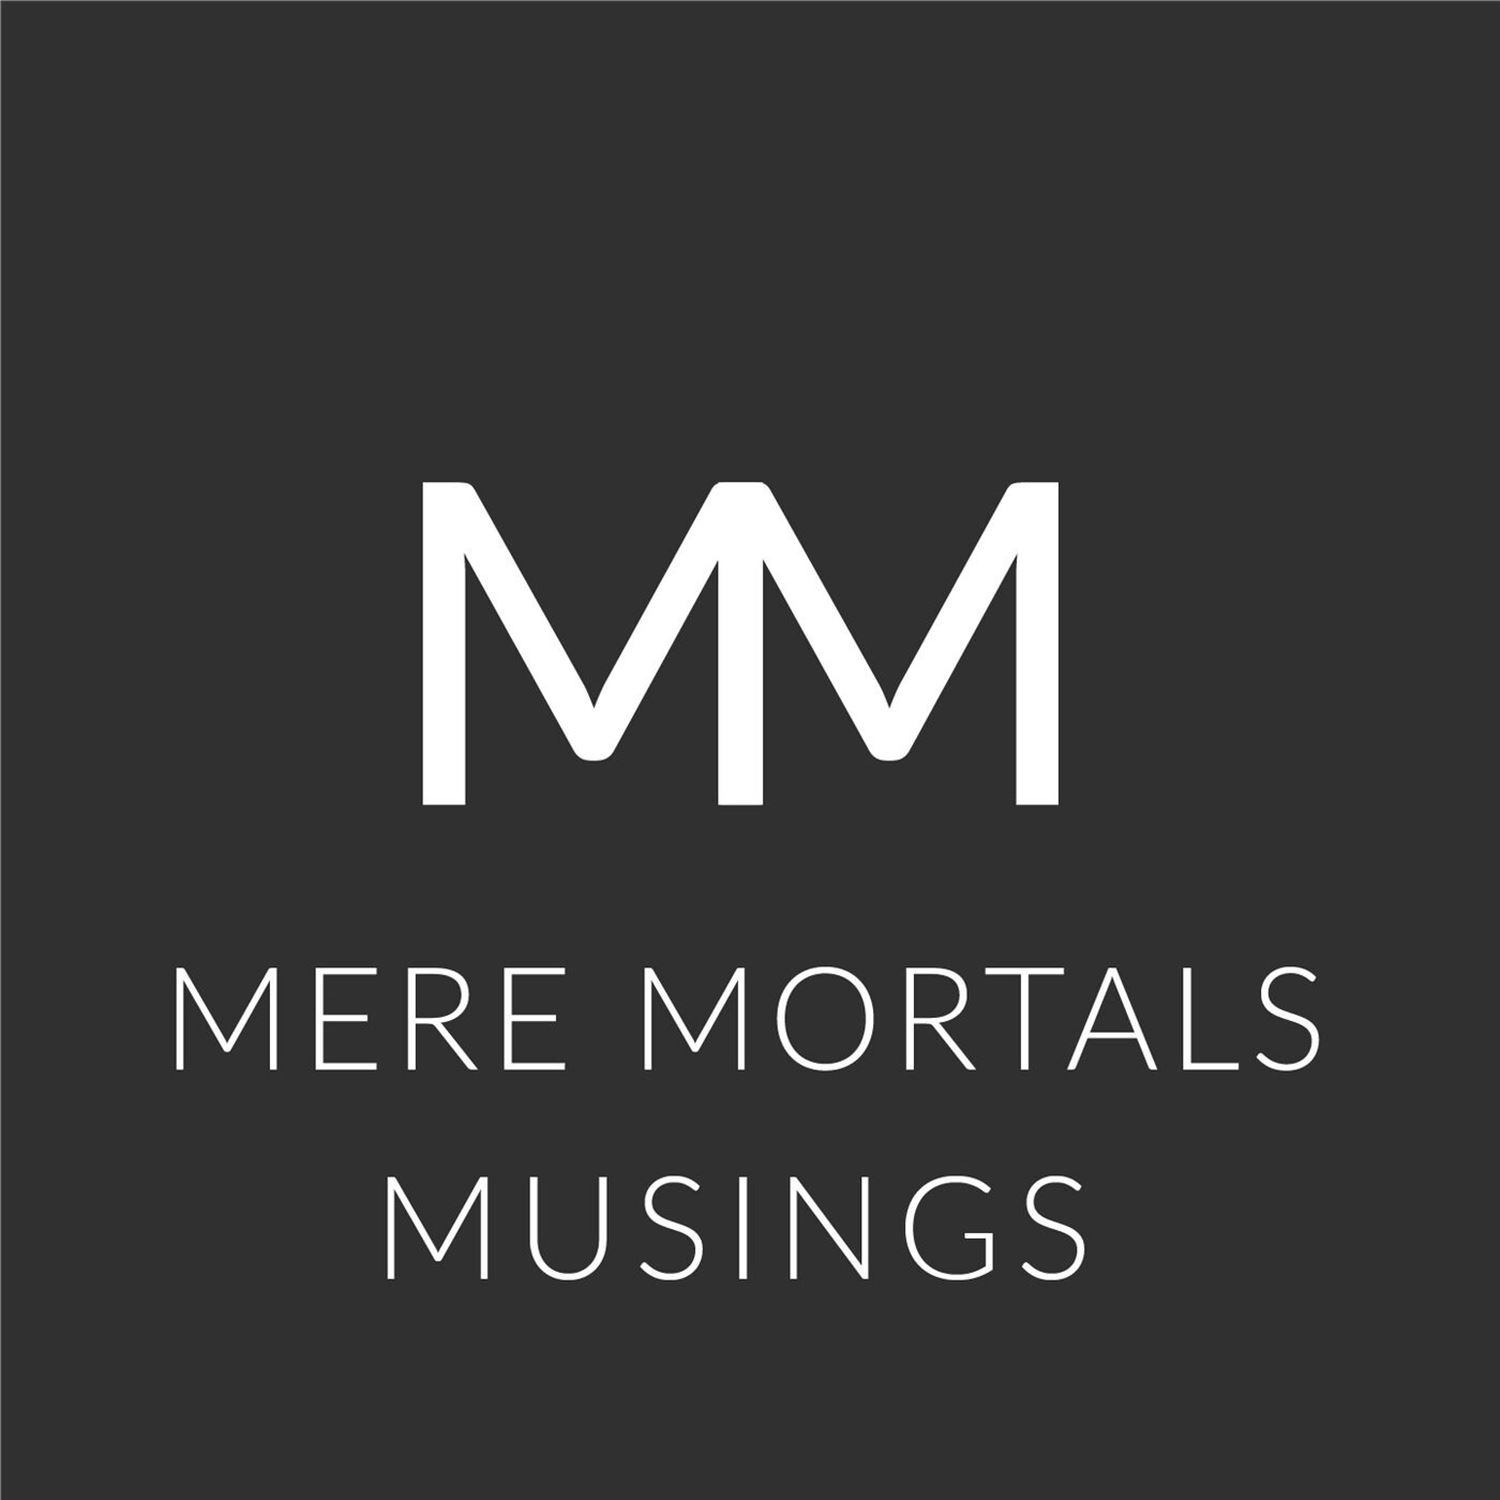 Purely Existing To Continuous Elation (Mere Mortals Episode #60 - Musings)